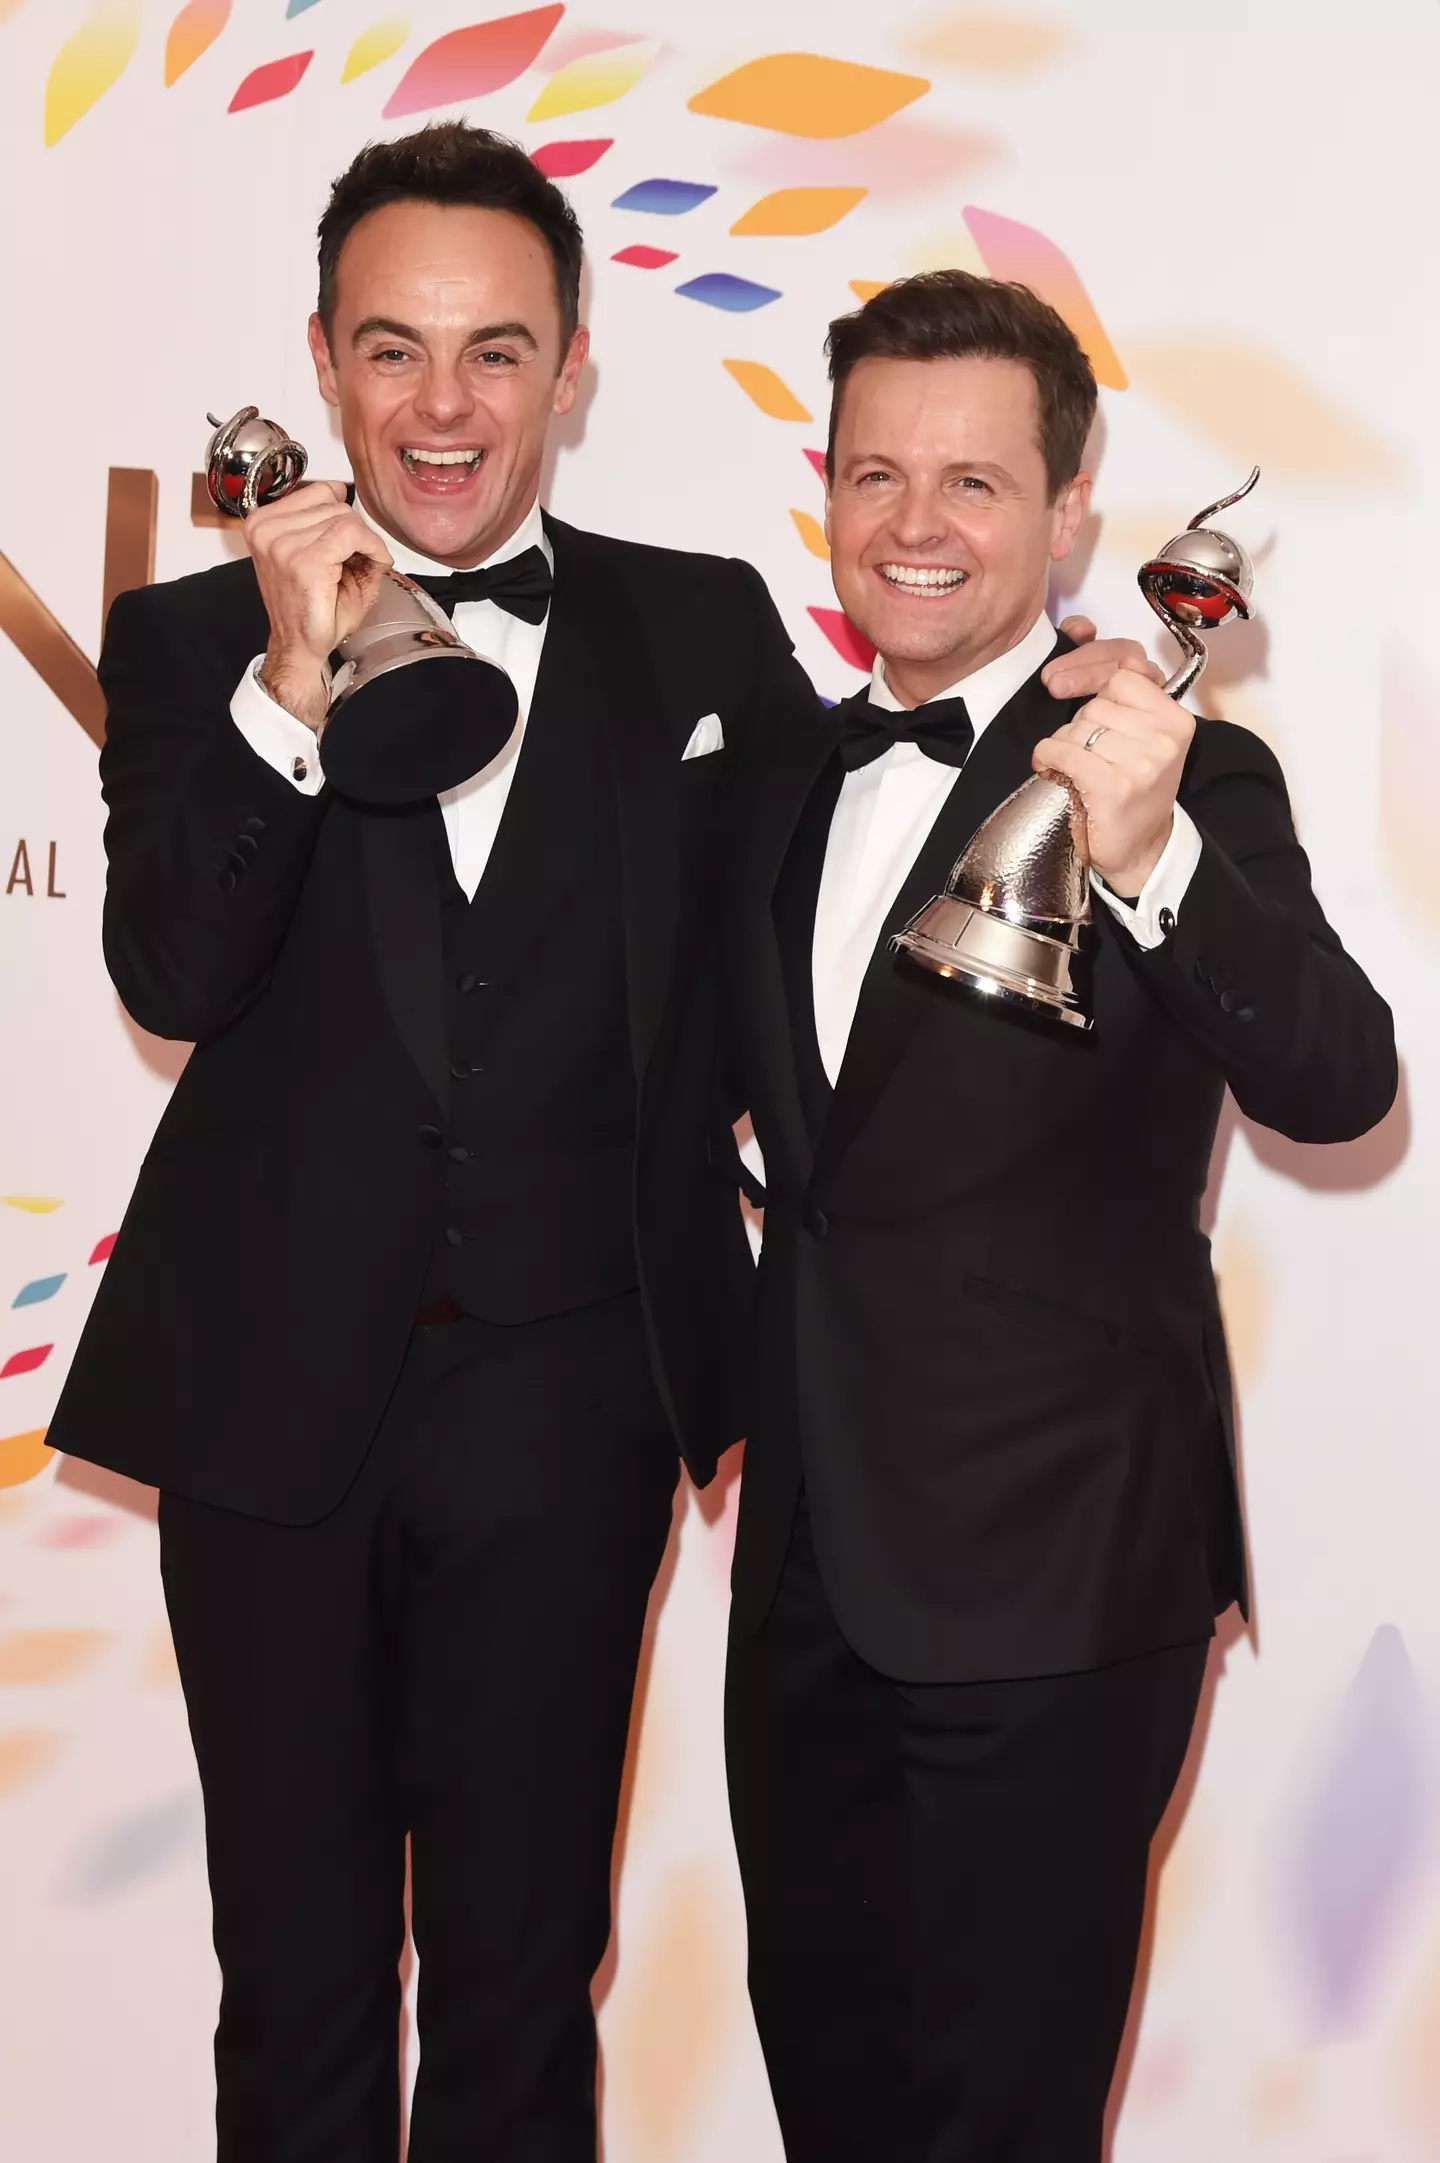 Ant and Dec walked away with yet another NTA.